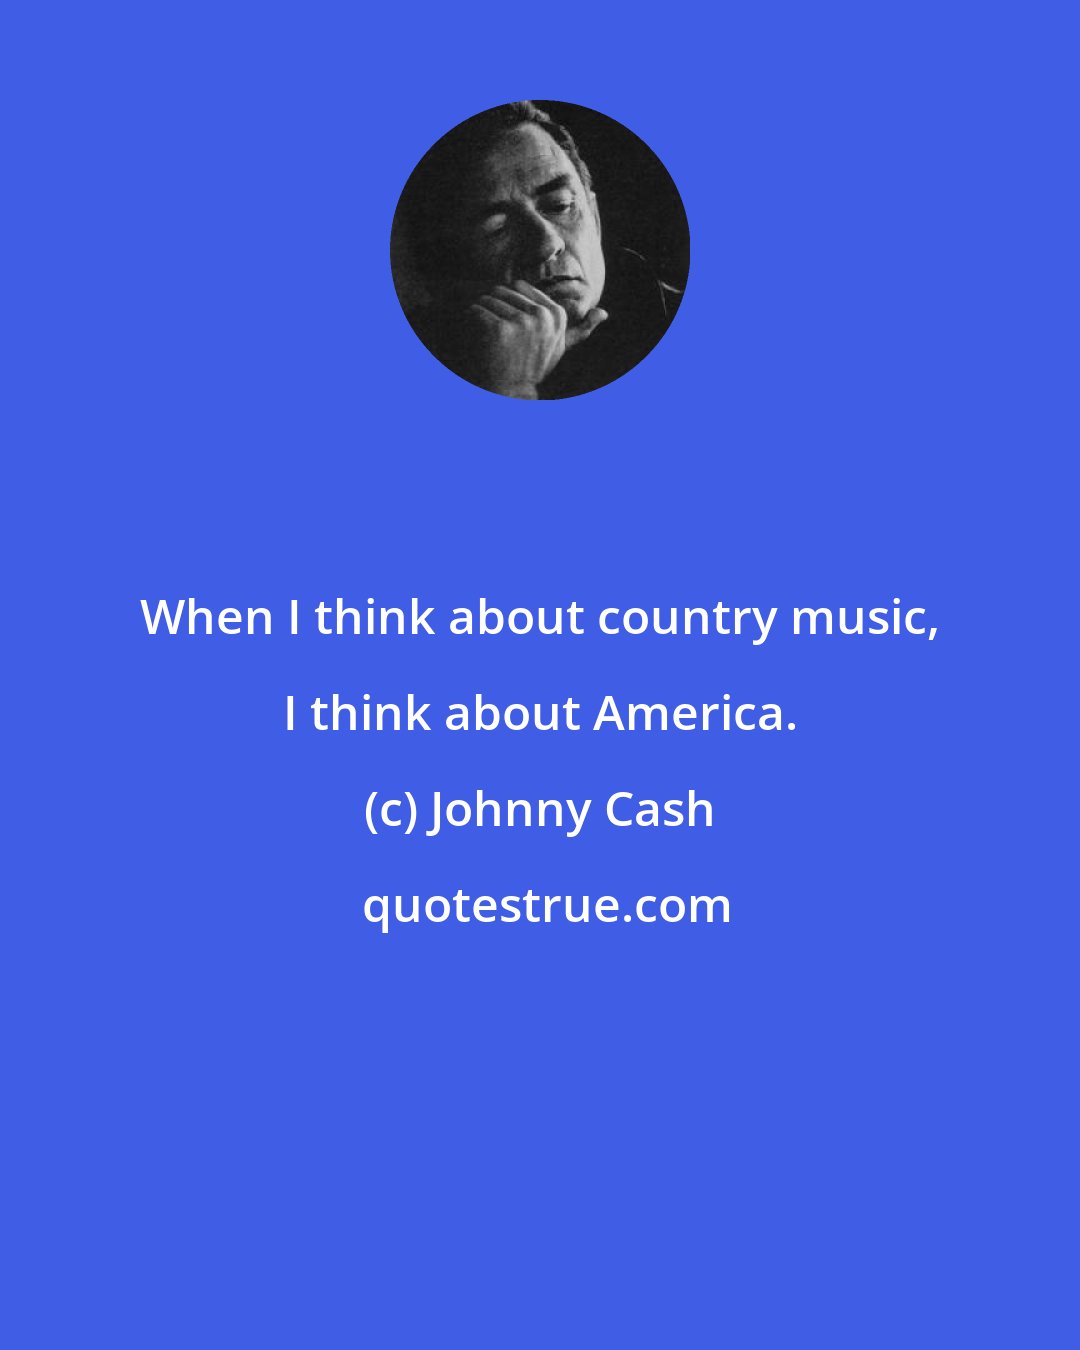 Johnny Cash: When I think about country music, I think about America.